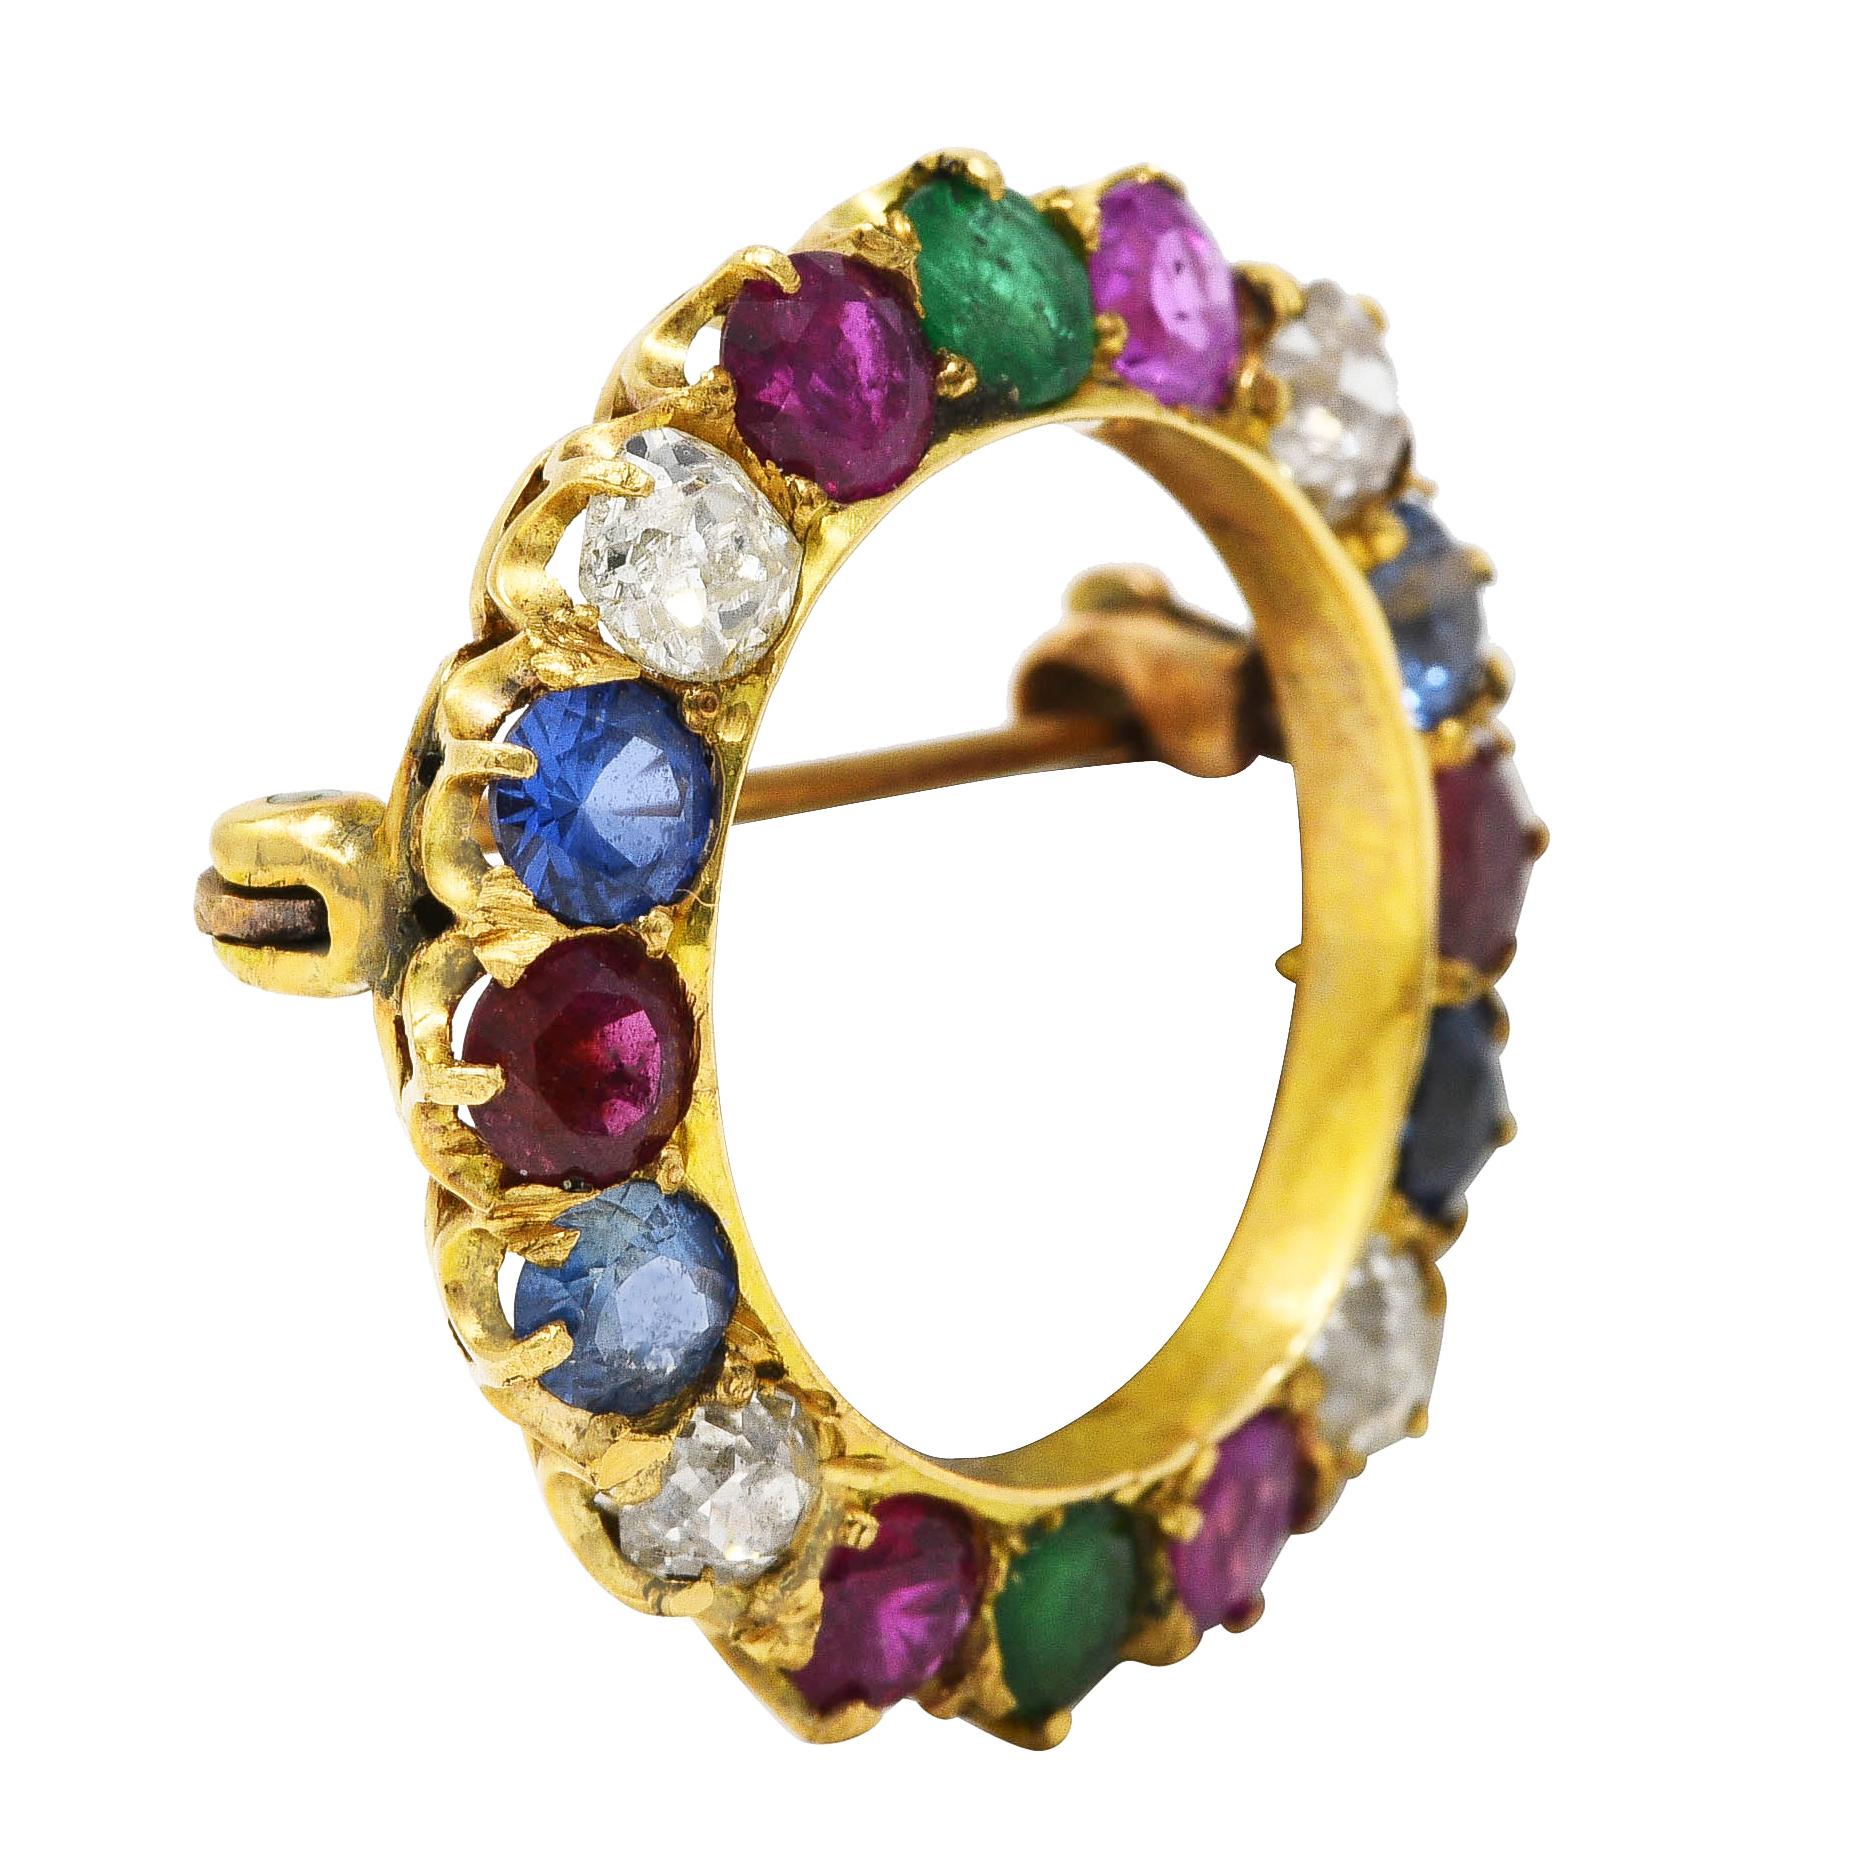 Circular brooch is set throughout by round cut gemstones - blue sapphires, pink sapphires, rubies, emeralds, and diamonds

Old mine cut diamonds weigh in total approximately 0.55 carat - I/J color with SI1 clarity

Emeralds weigh approximately 0.18